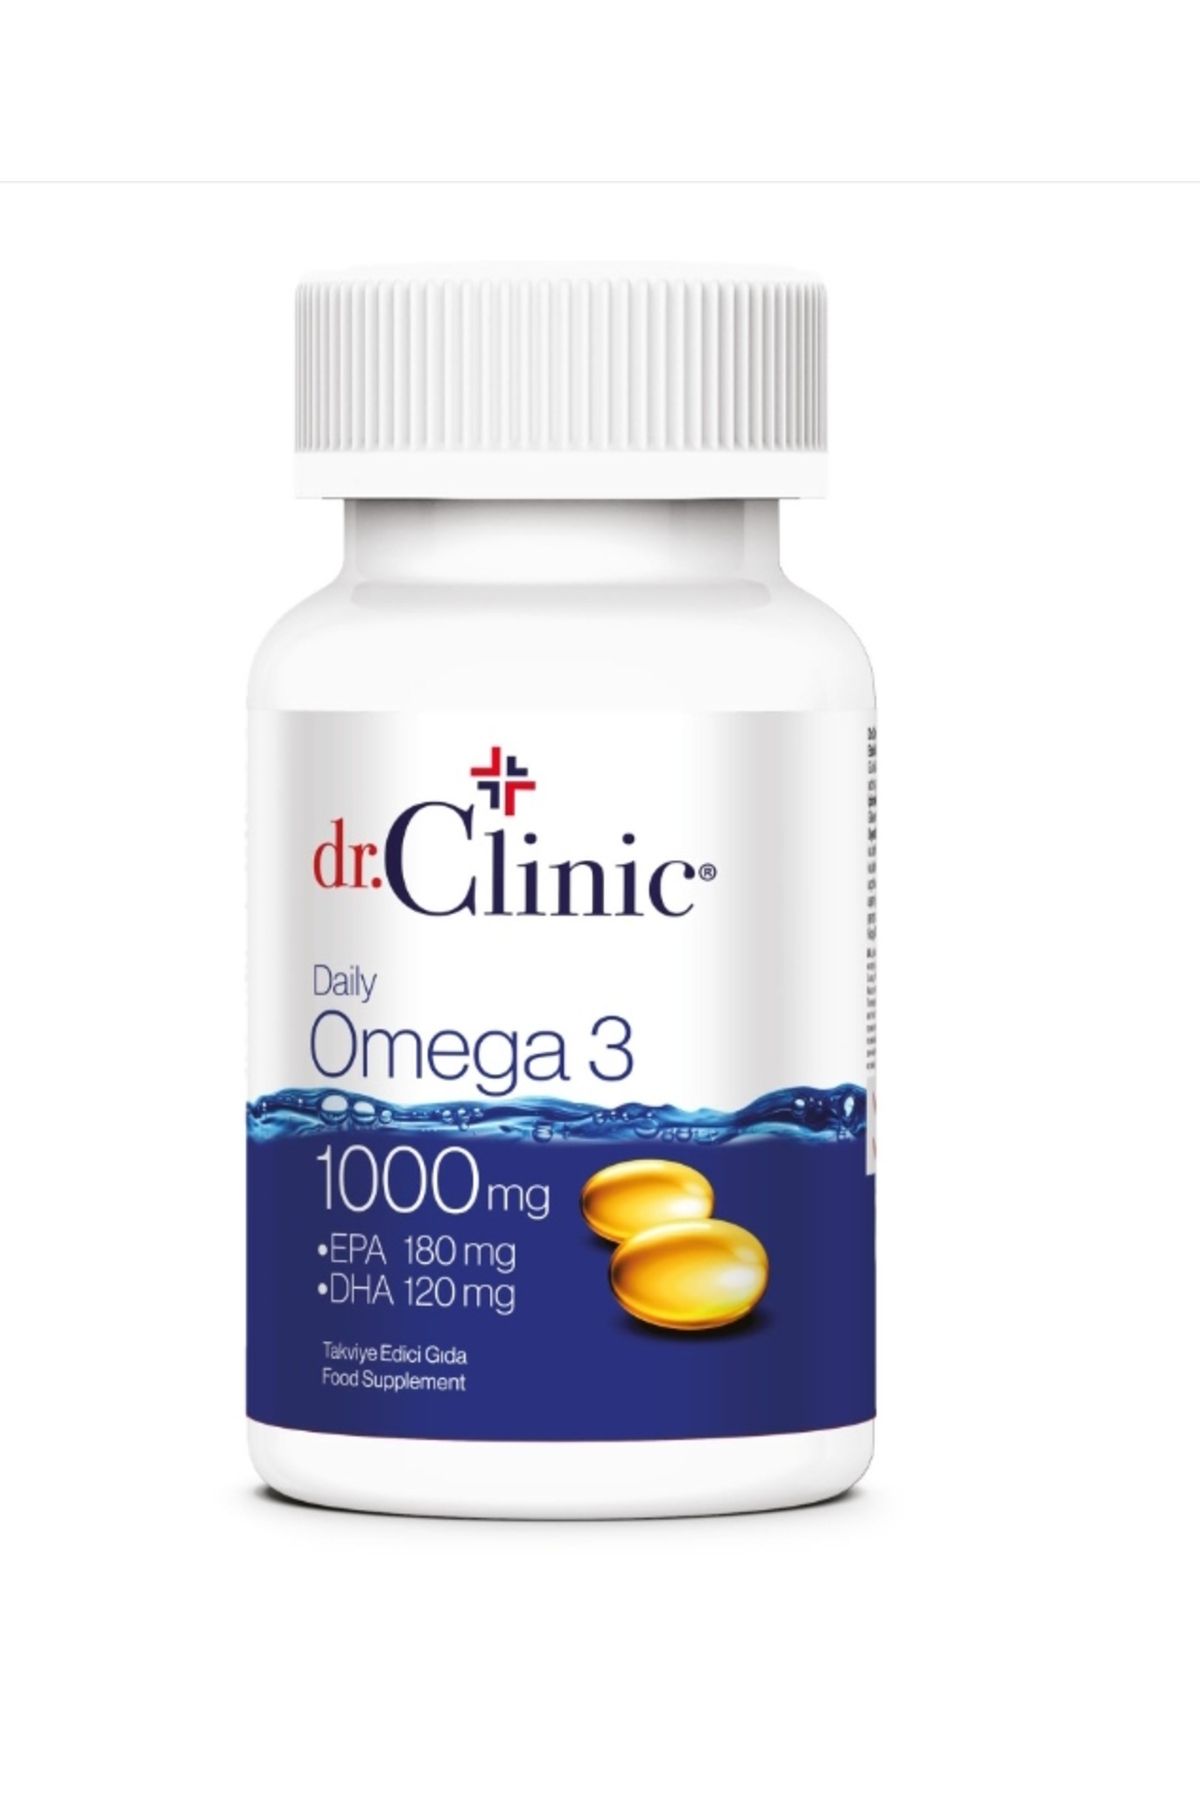 Dr. Clinic Dr.clinic daily omega 3 1000 mg